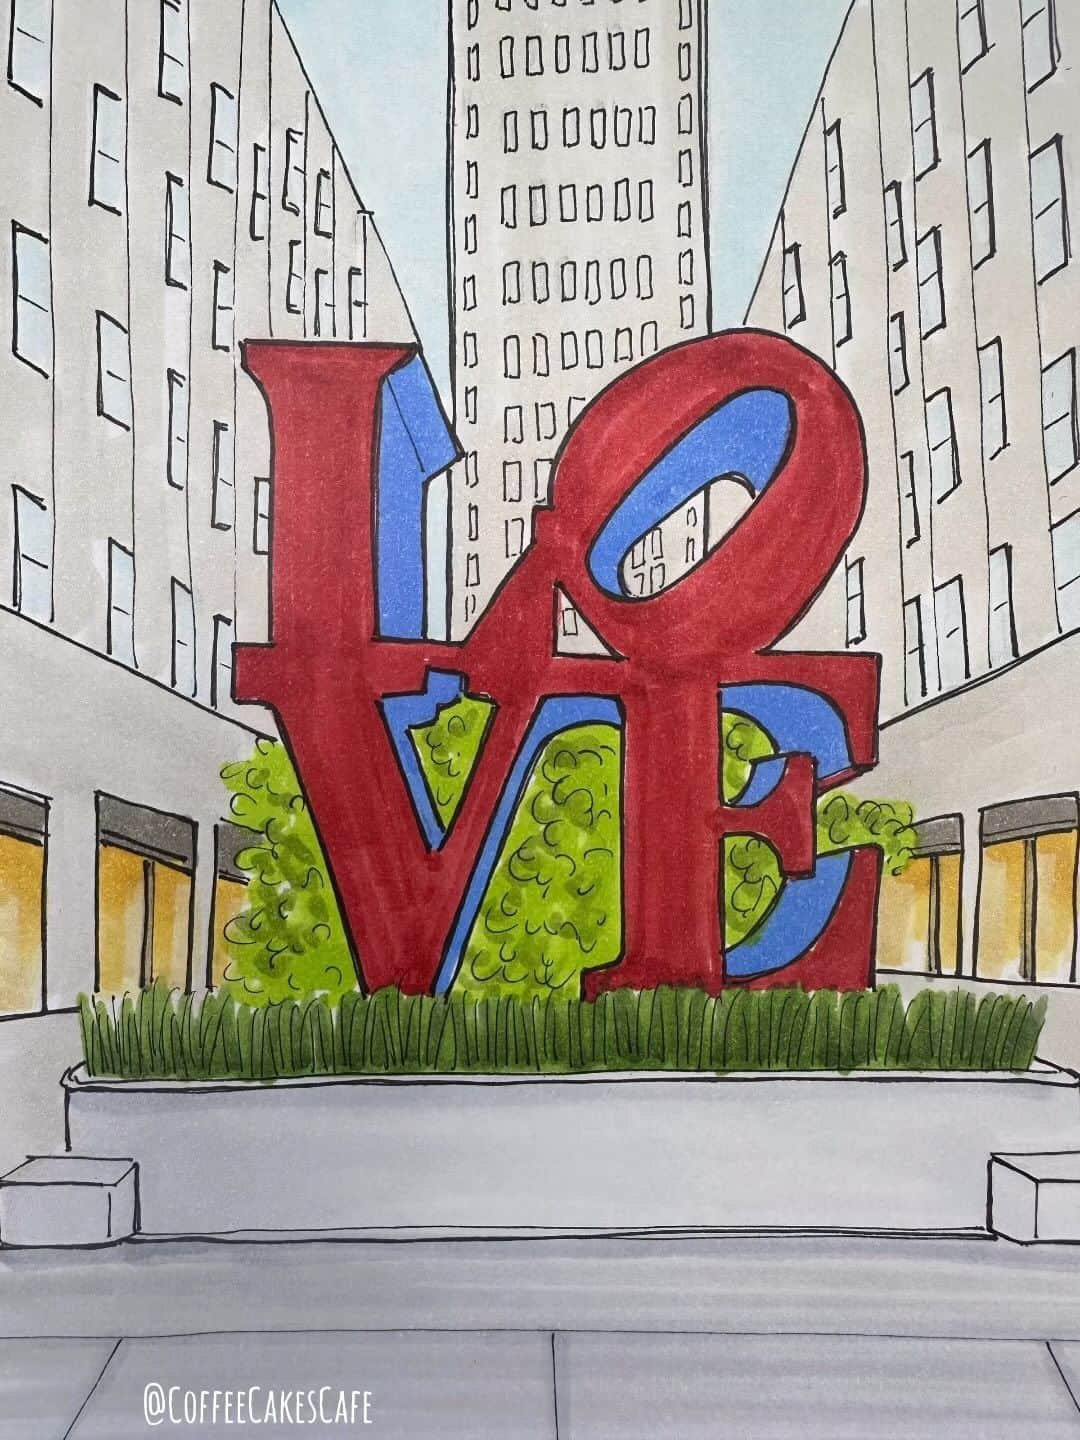 RIASIMのインスタグラム：「The LOVE SCULPTURE created by @robertindiana is back and it’s at @rockefellercenter !!! ❤️  . Date: September 13 - October 24 . For fun pics and videos for those not in the city, or will not be here during the time the sculpture is at the Rockefeller Center, check out the following accounts: . @nystepbystep ✨ @kiariladyboss ✨ @nyclovesnyc ✨ @divasennyc ✨ @ritafloresart ✨ . Have a wonderful day everyone!! ❤️😁 . . . . . . . #rockefellercenter #rockefellercentre #rockefellerplaza #rockefellercenternyc #stopmotionanimation #coffeecakescafe #robertindiana #robertindianalove #lovesculpture #lovesculpturenyc #prettycitynewyork #made_in_ny #westvillagelife #westvillage #westvillagenyc #nycart #nycartist」